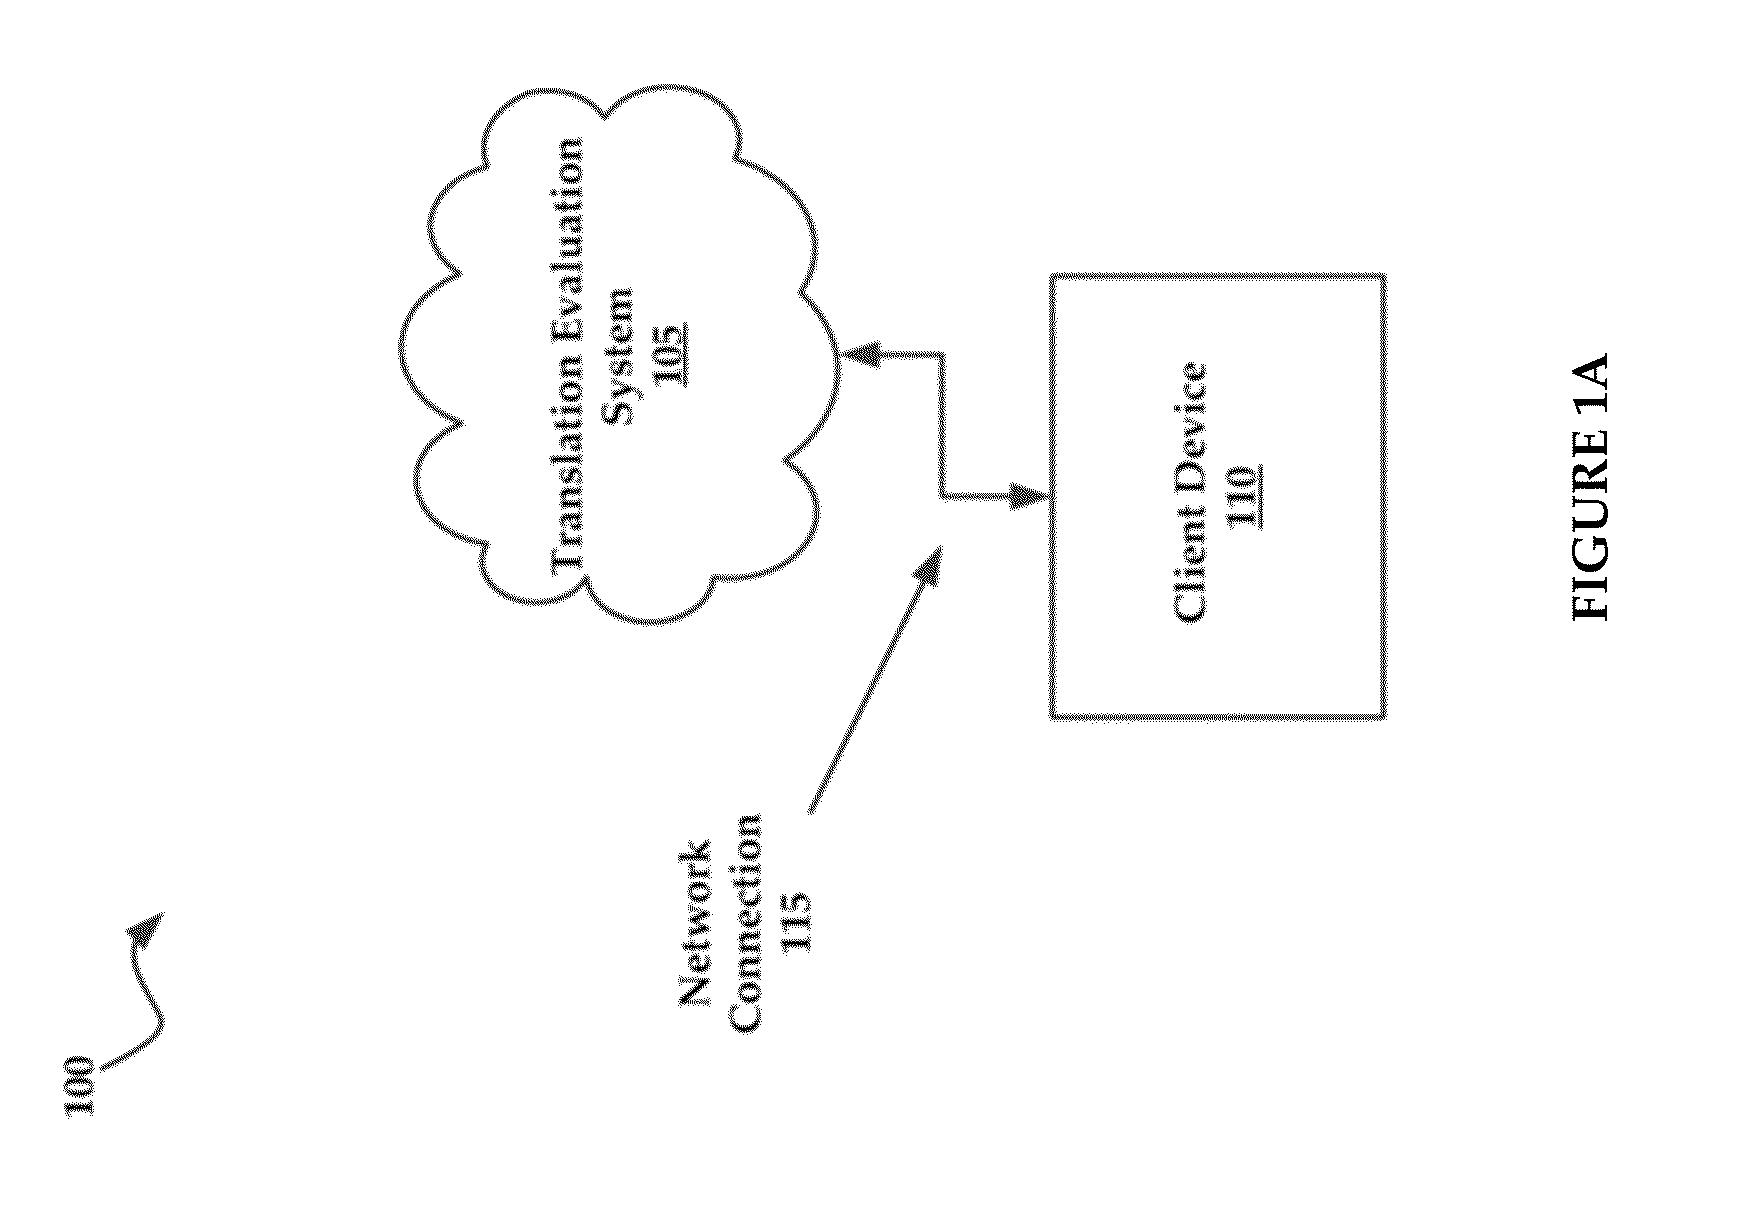 Method and System for Automatic Management of Reputation of Translators